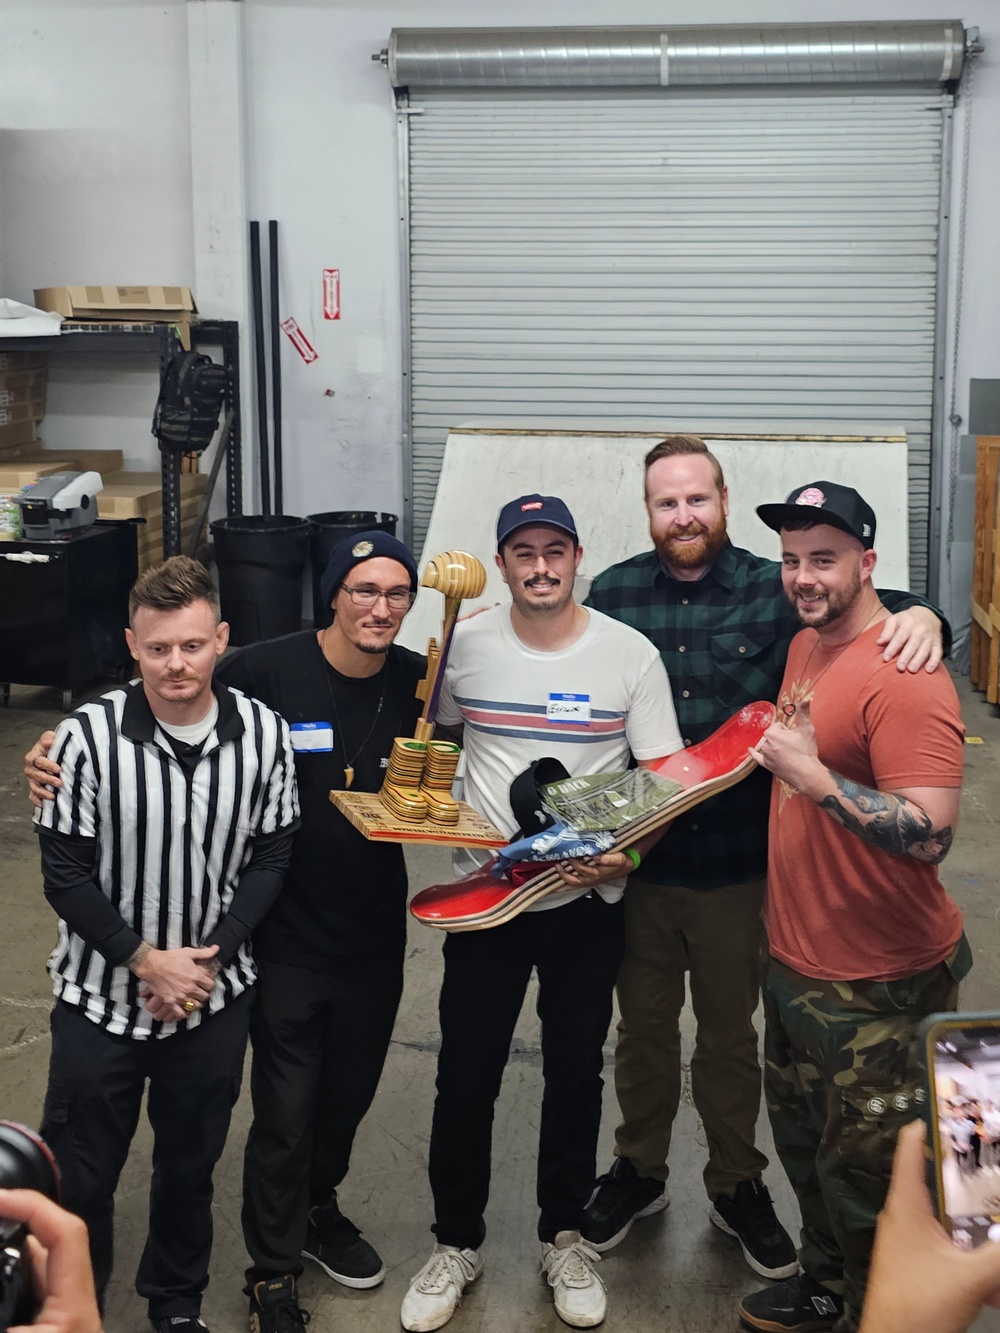 Team Kingsley Defender champion of Official Military Skate competition